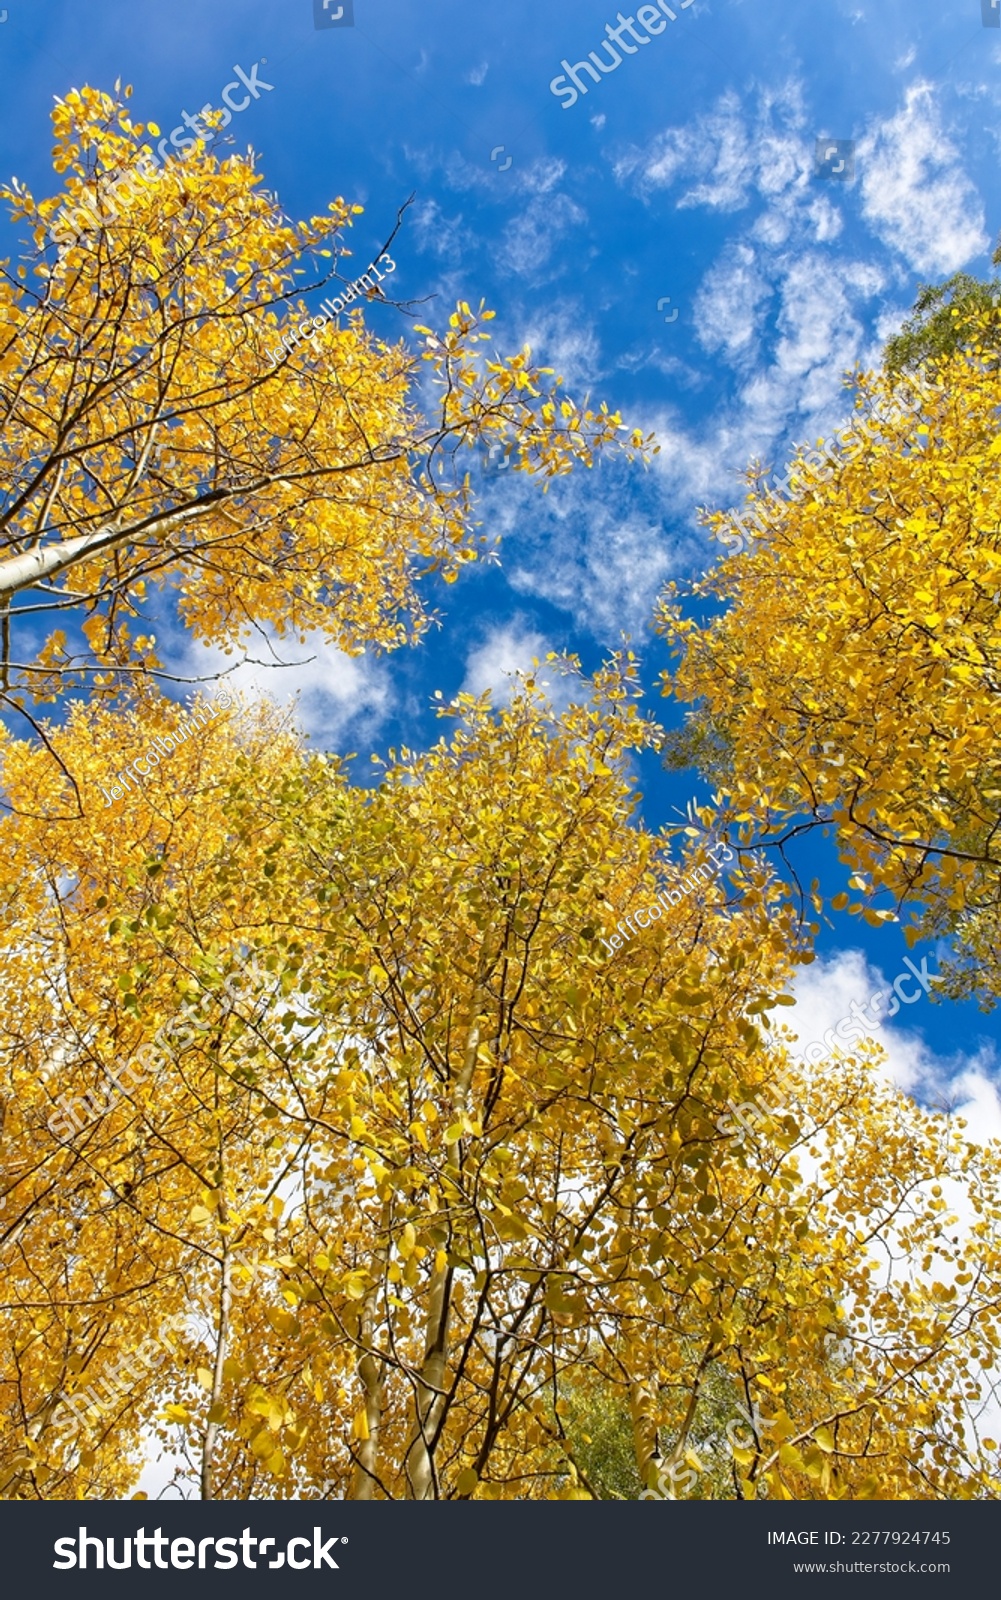 Looking up at yellow aspen trees in the fall. Clouds are in a vivid blue sky. Snowbowl, Flagstaff, Arizona. #2277924745